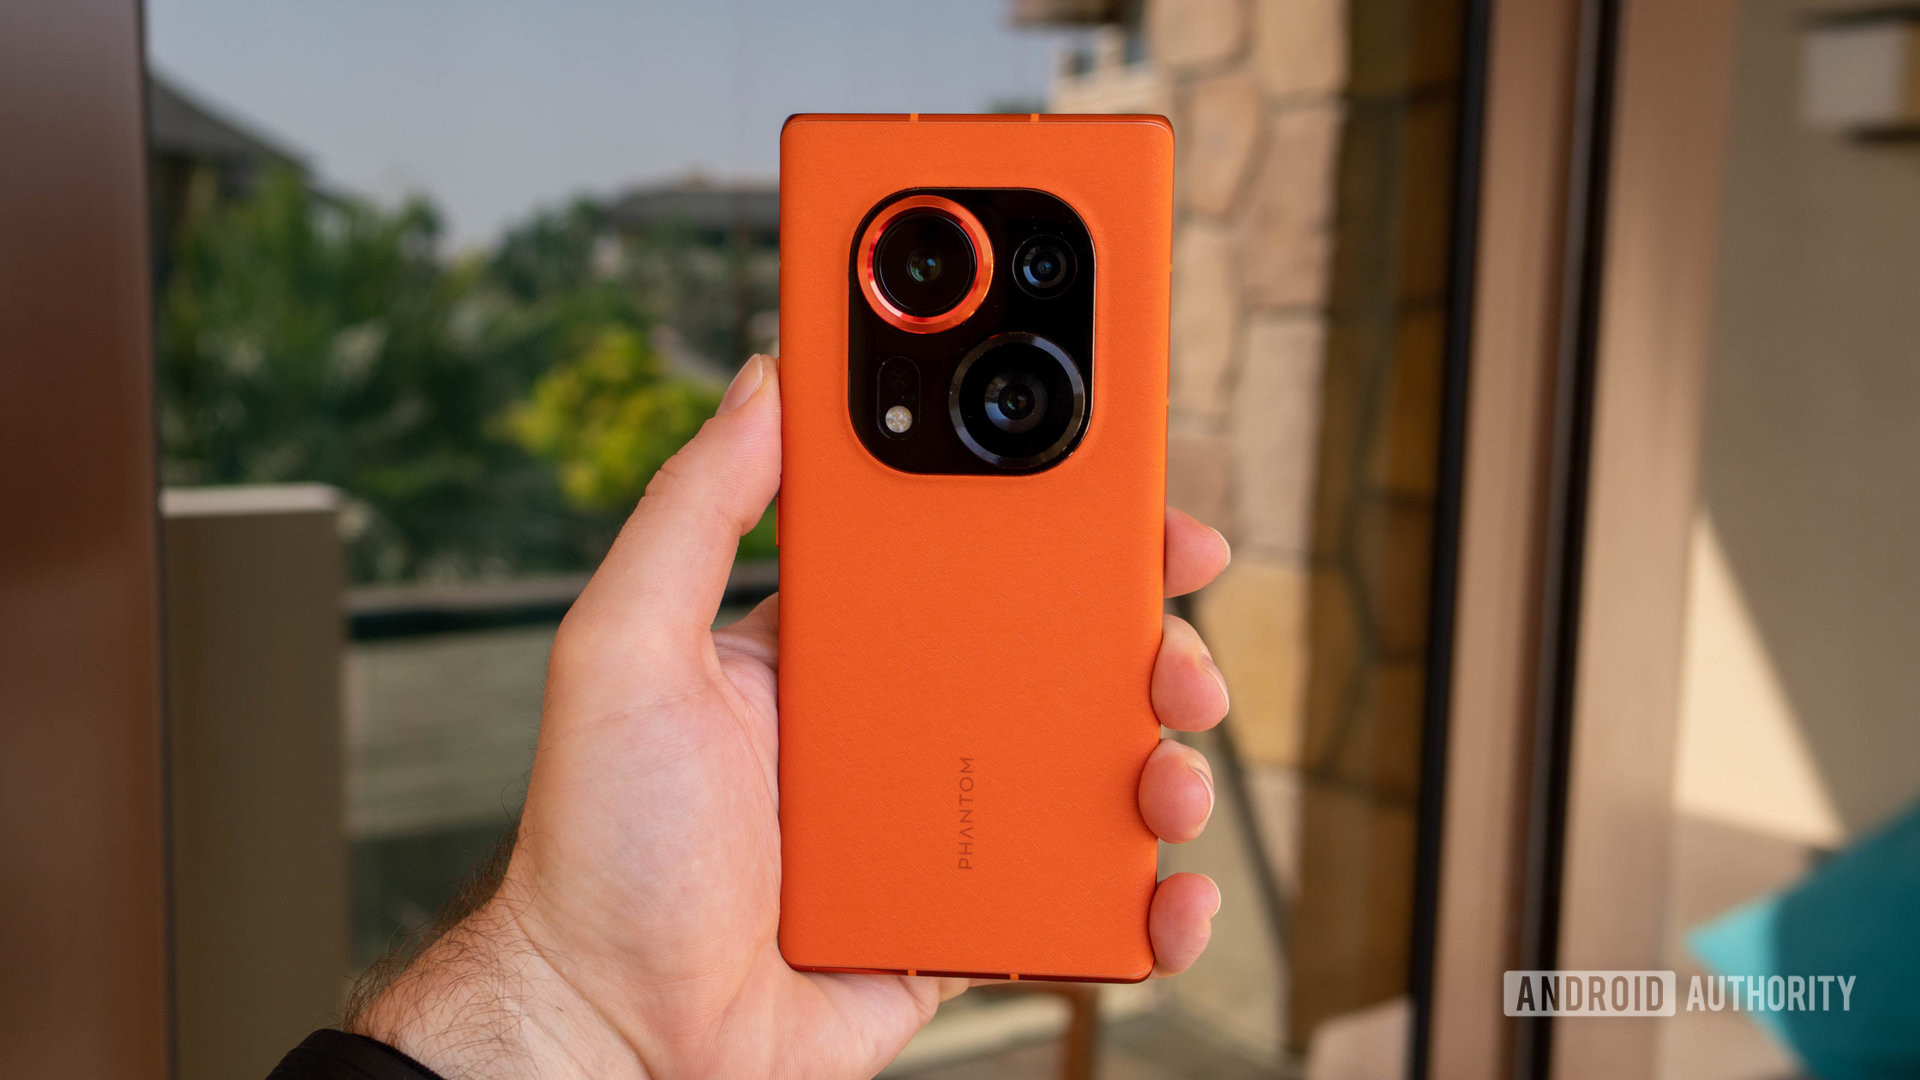 You can now buy a phone with a retractable rear camera